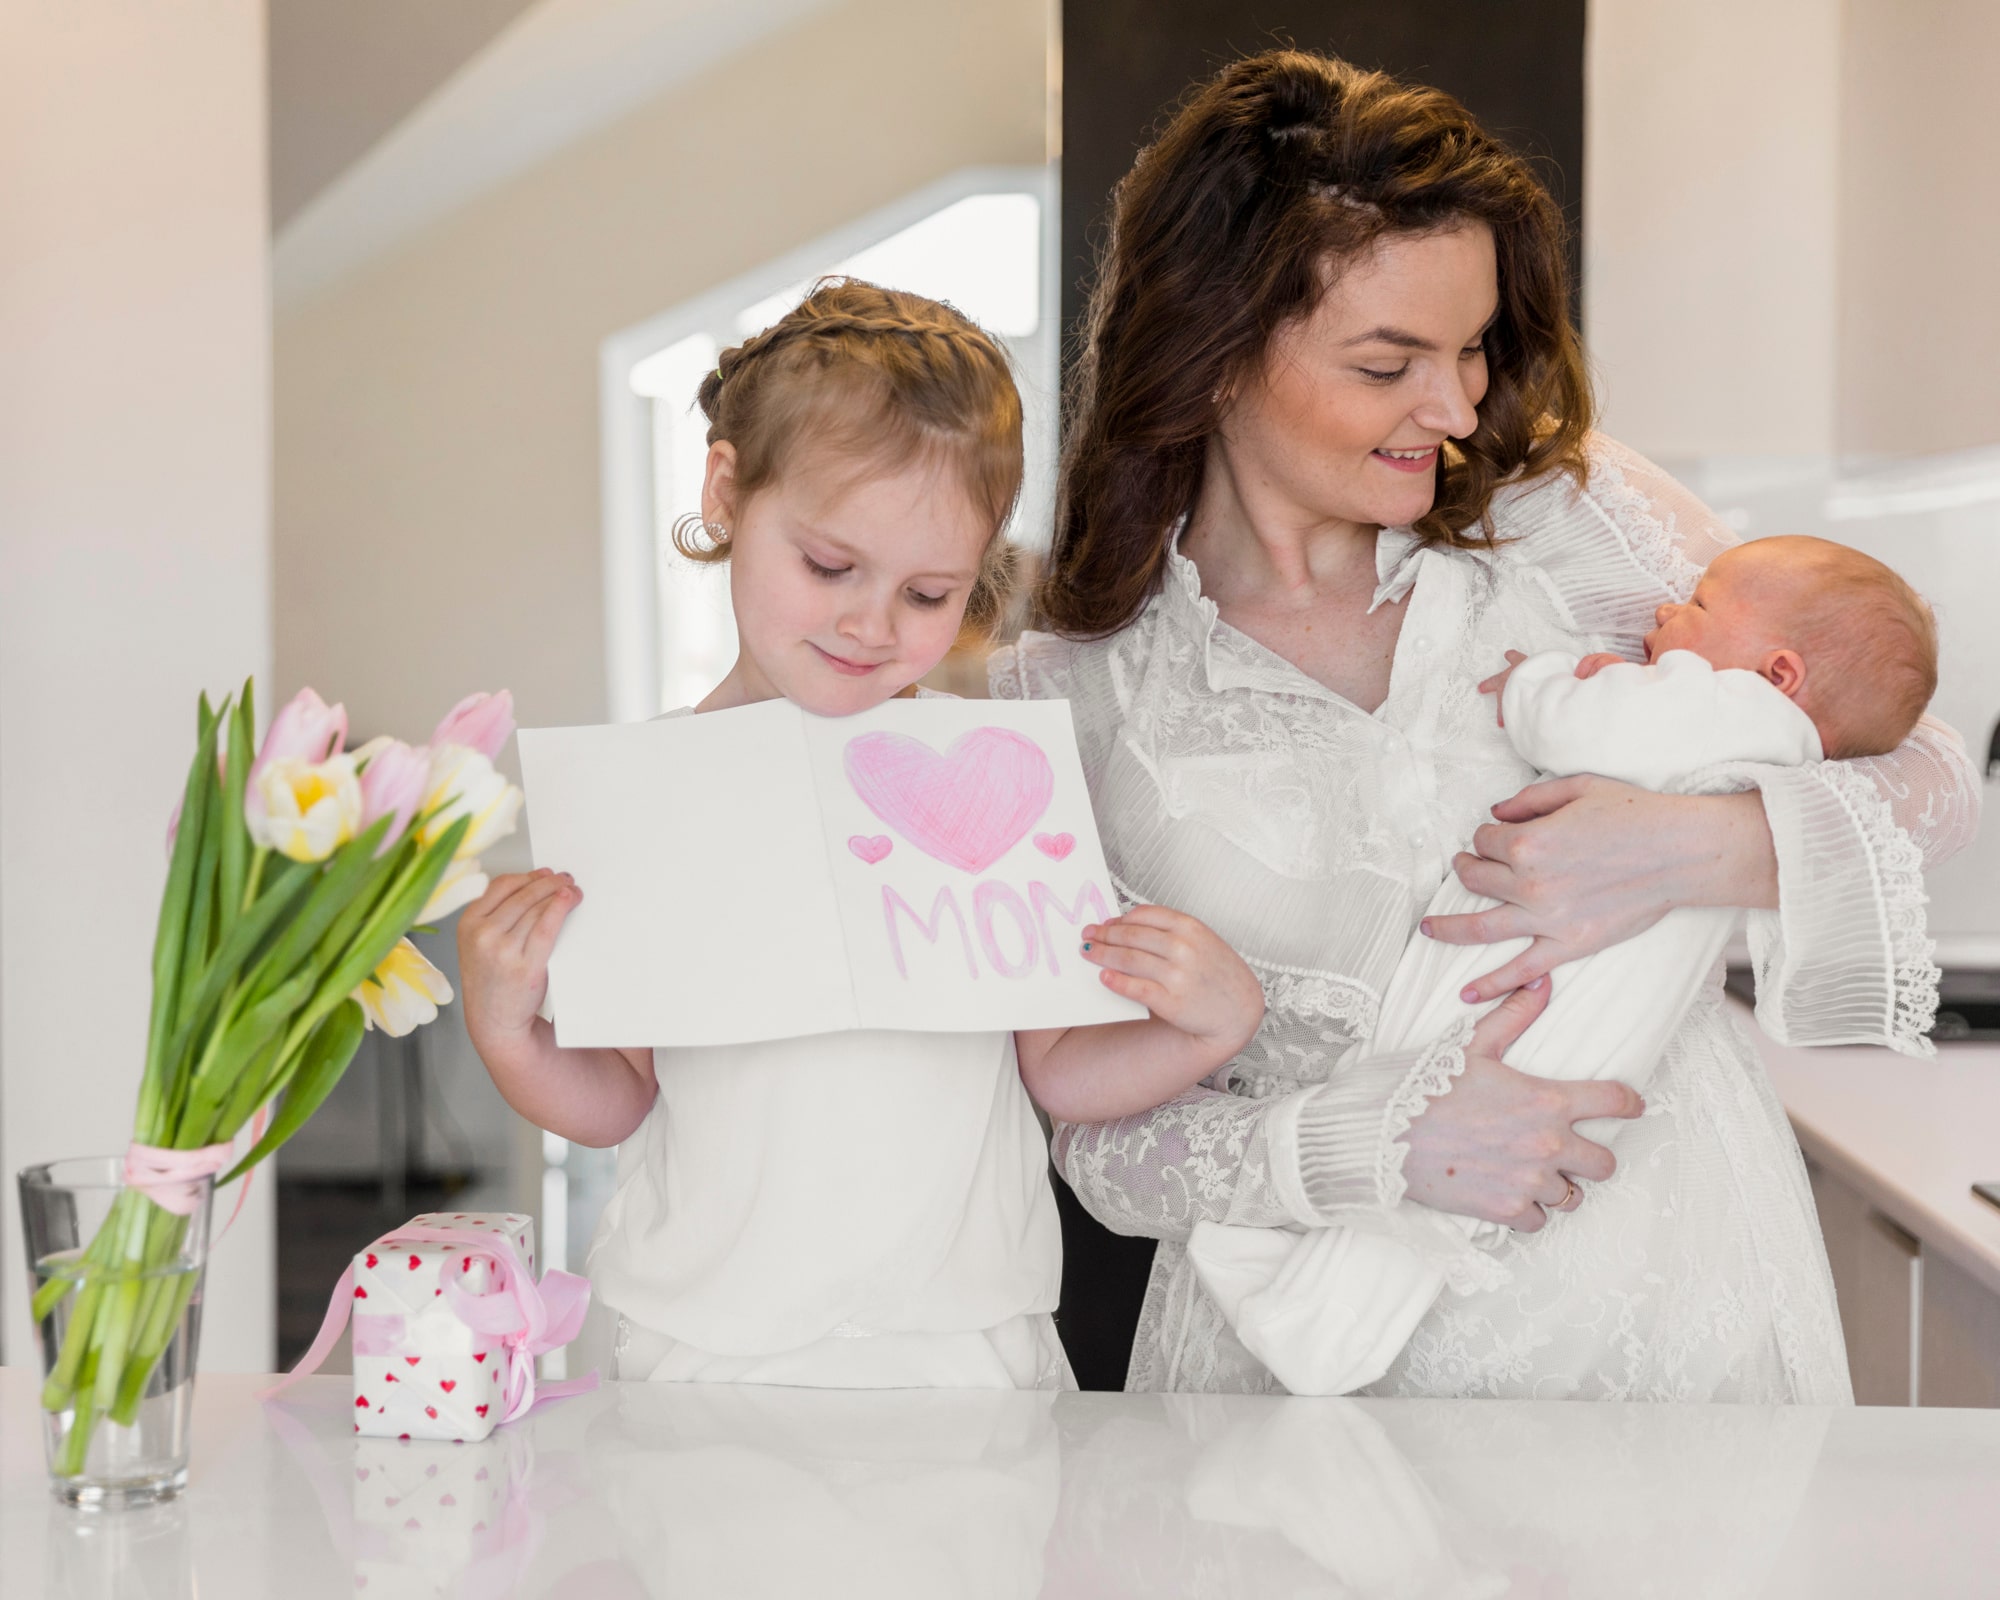 Top 10 Mother's Day Gifts From Your Baby to Make Mom Smile